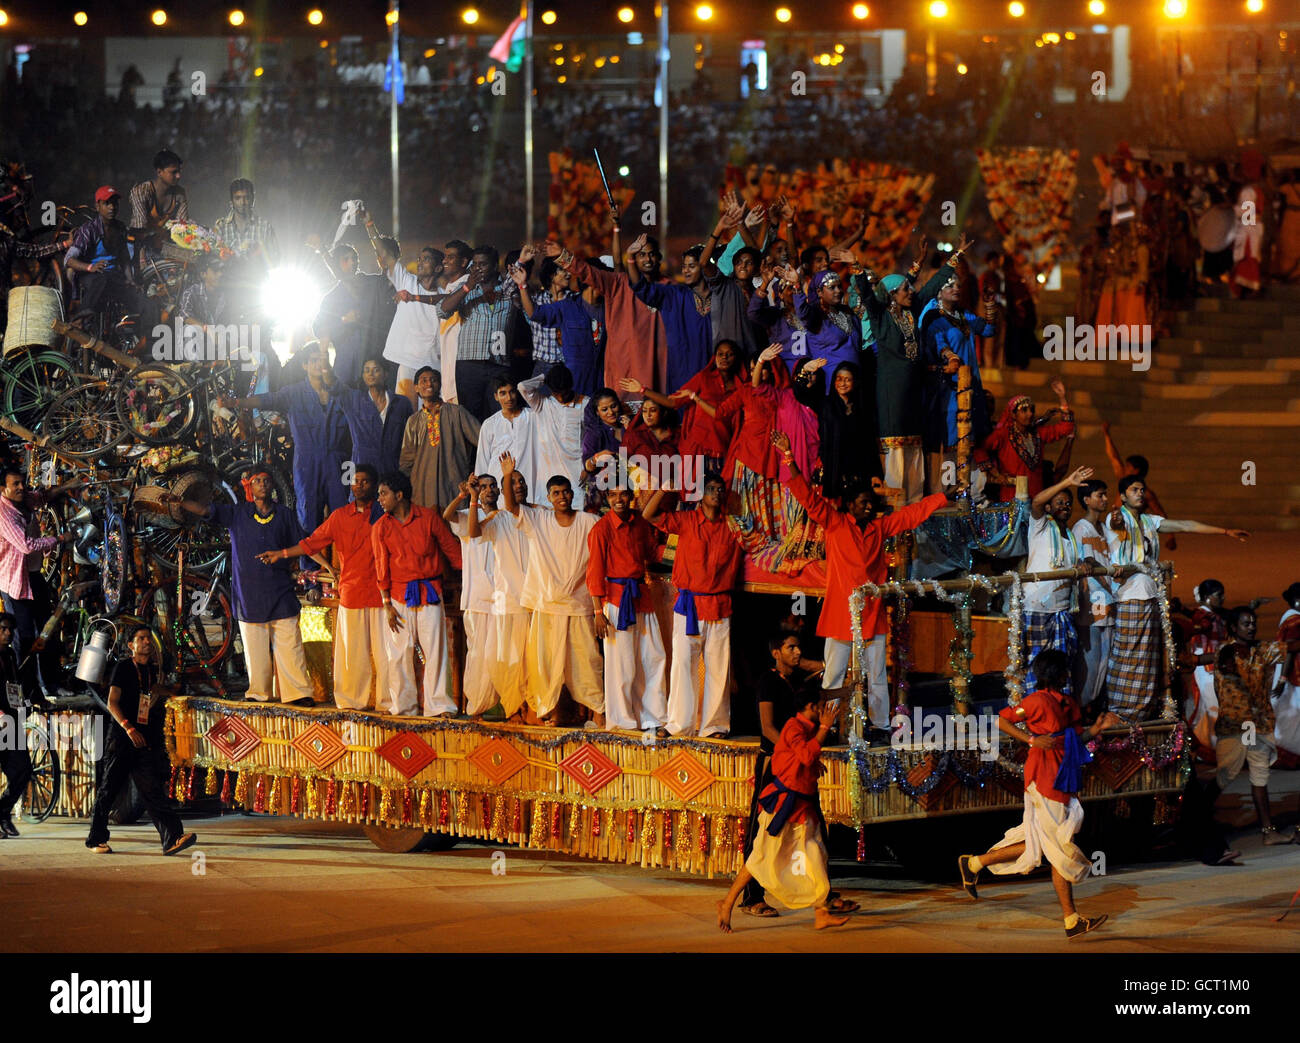 Performers on a float during the 2010 Commonwealth Games opening ceremony at the Jawaharlal Nehru Stadium in New Delhi, India. Stock Photo